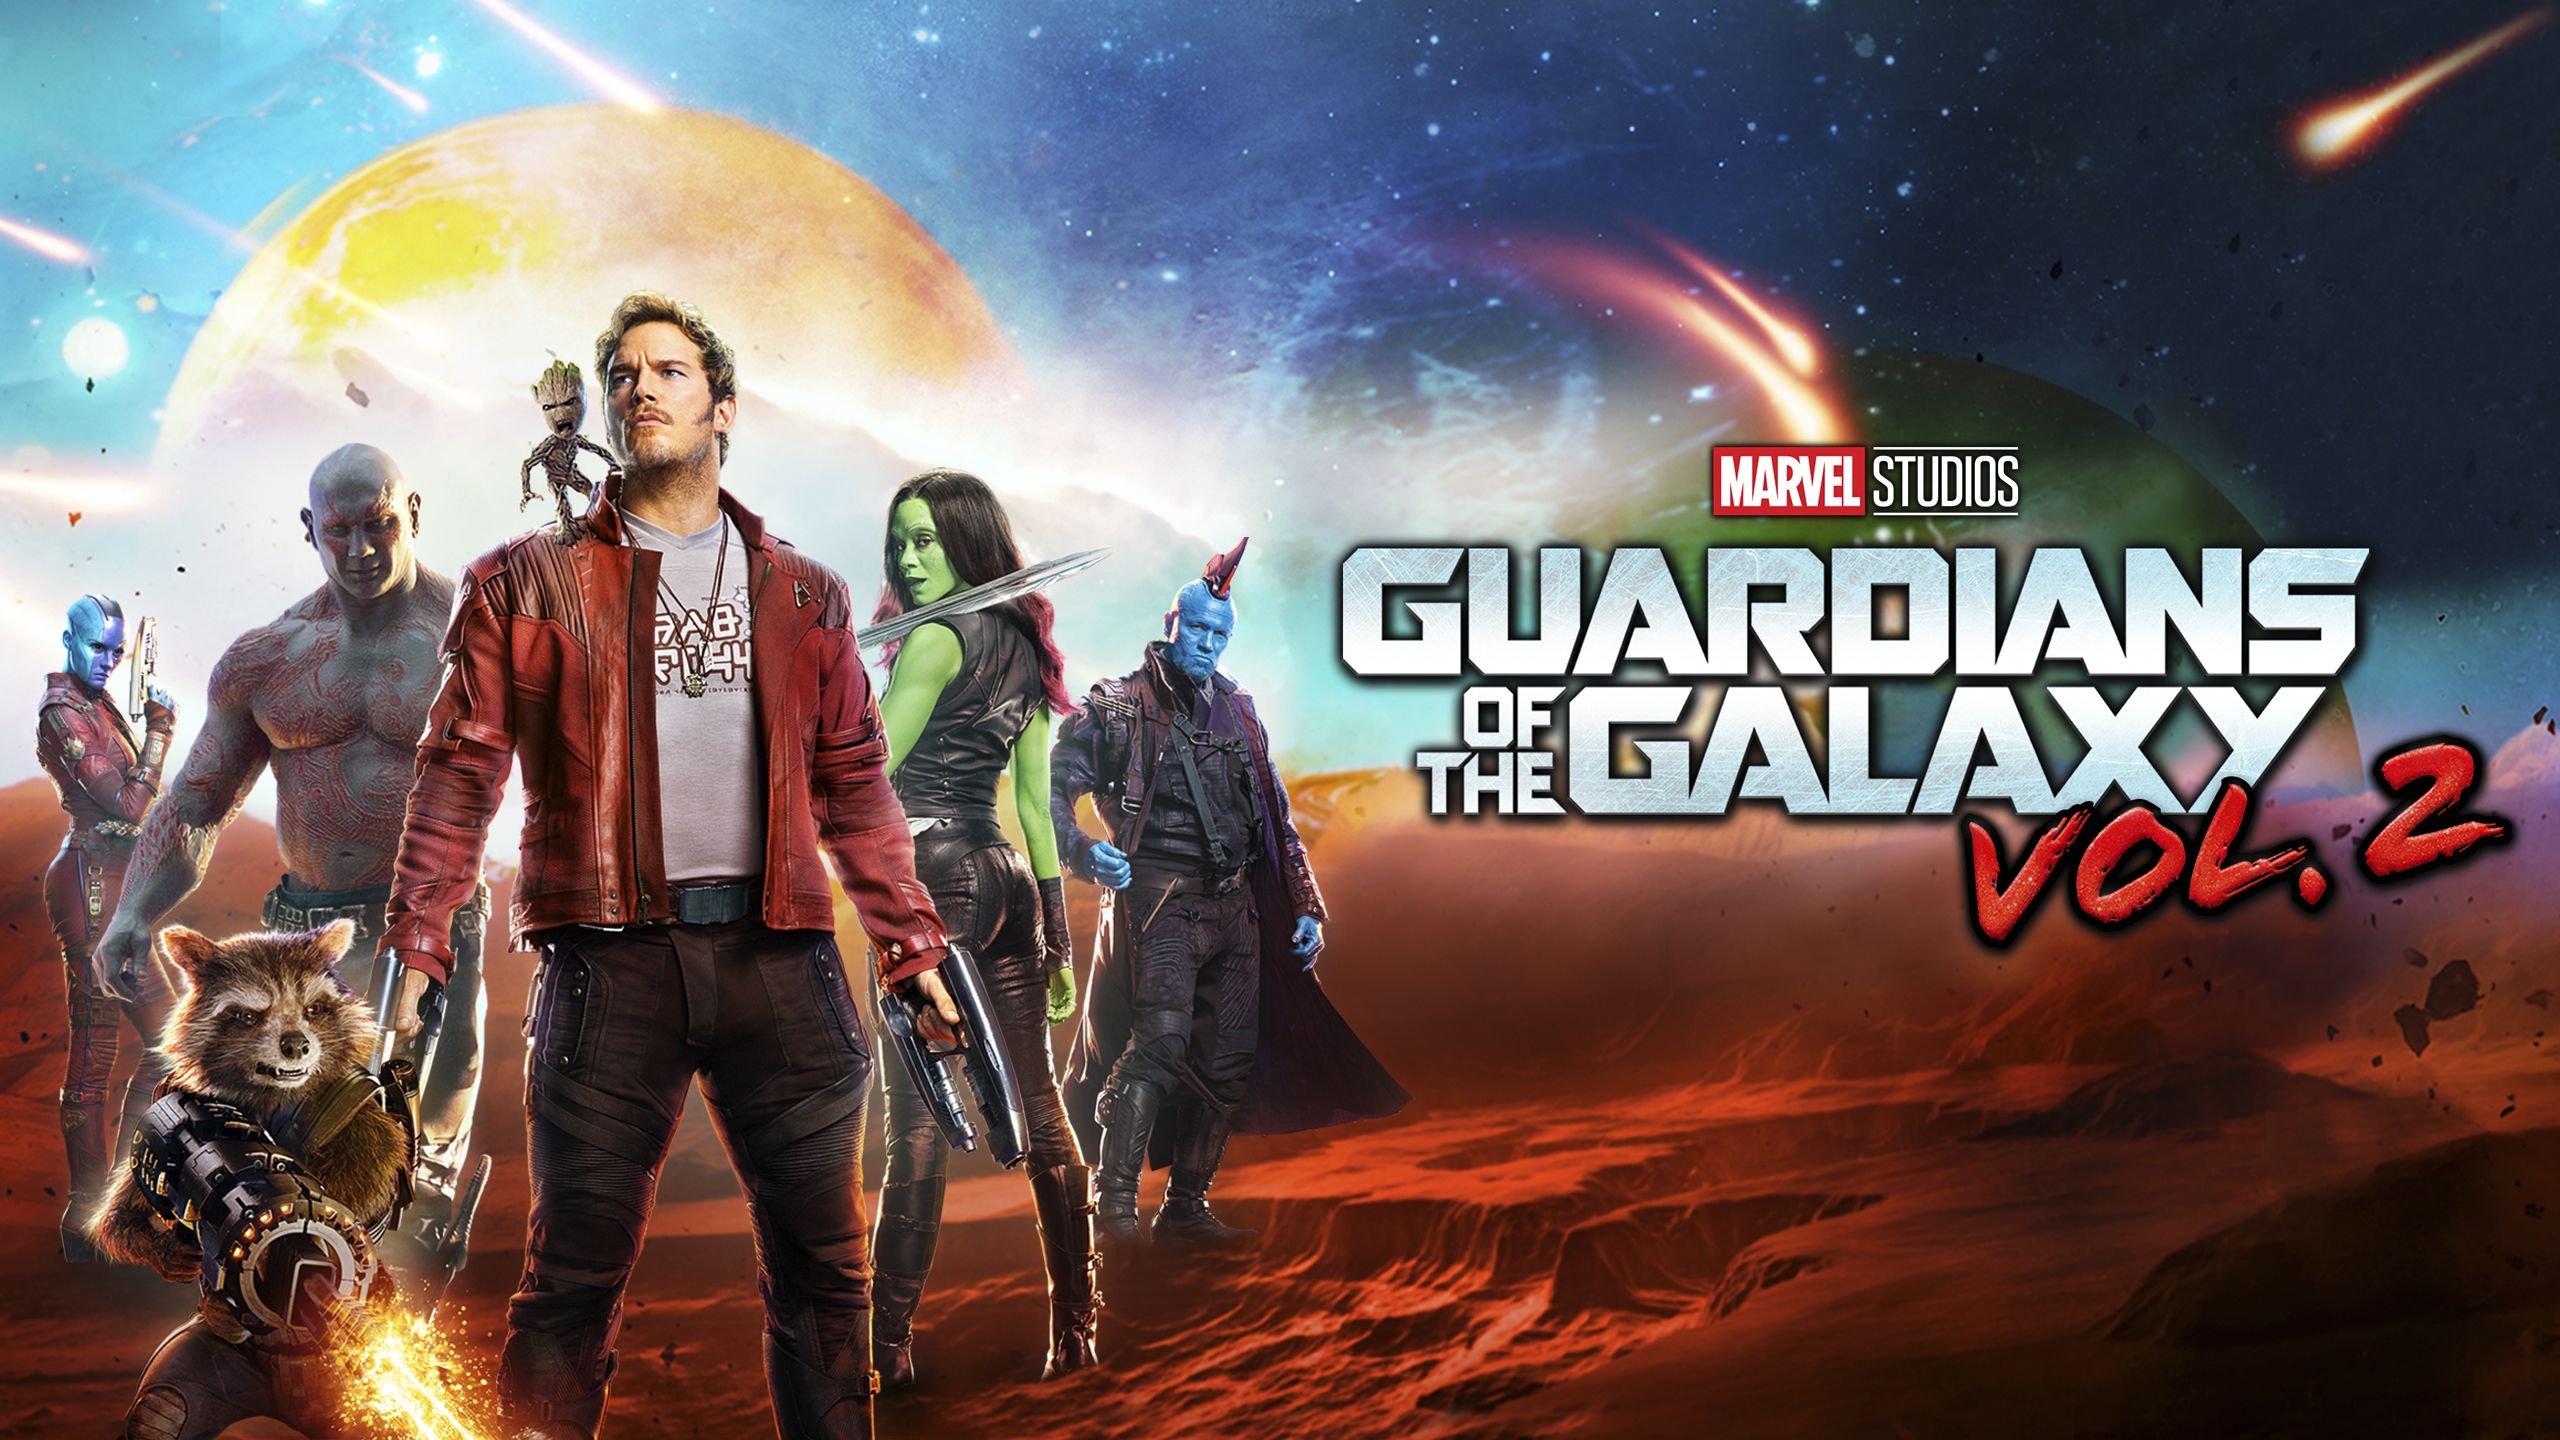 GUARDIANS OF THE GALAXY VOL. 2 (2017)